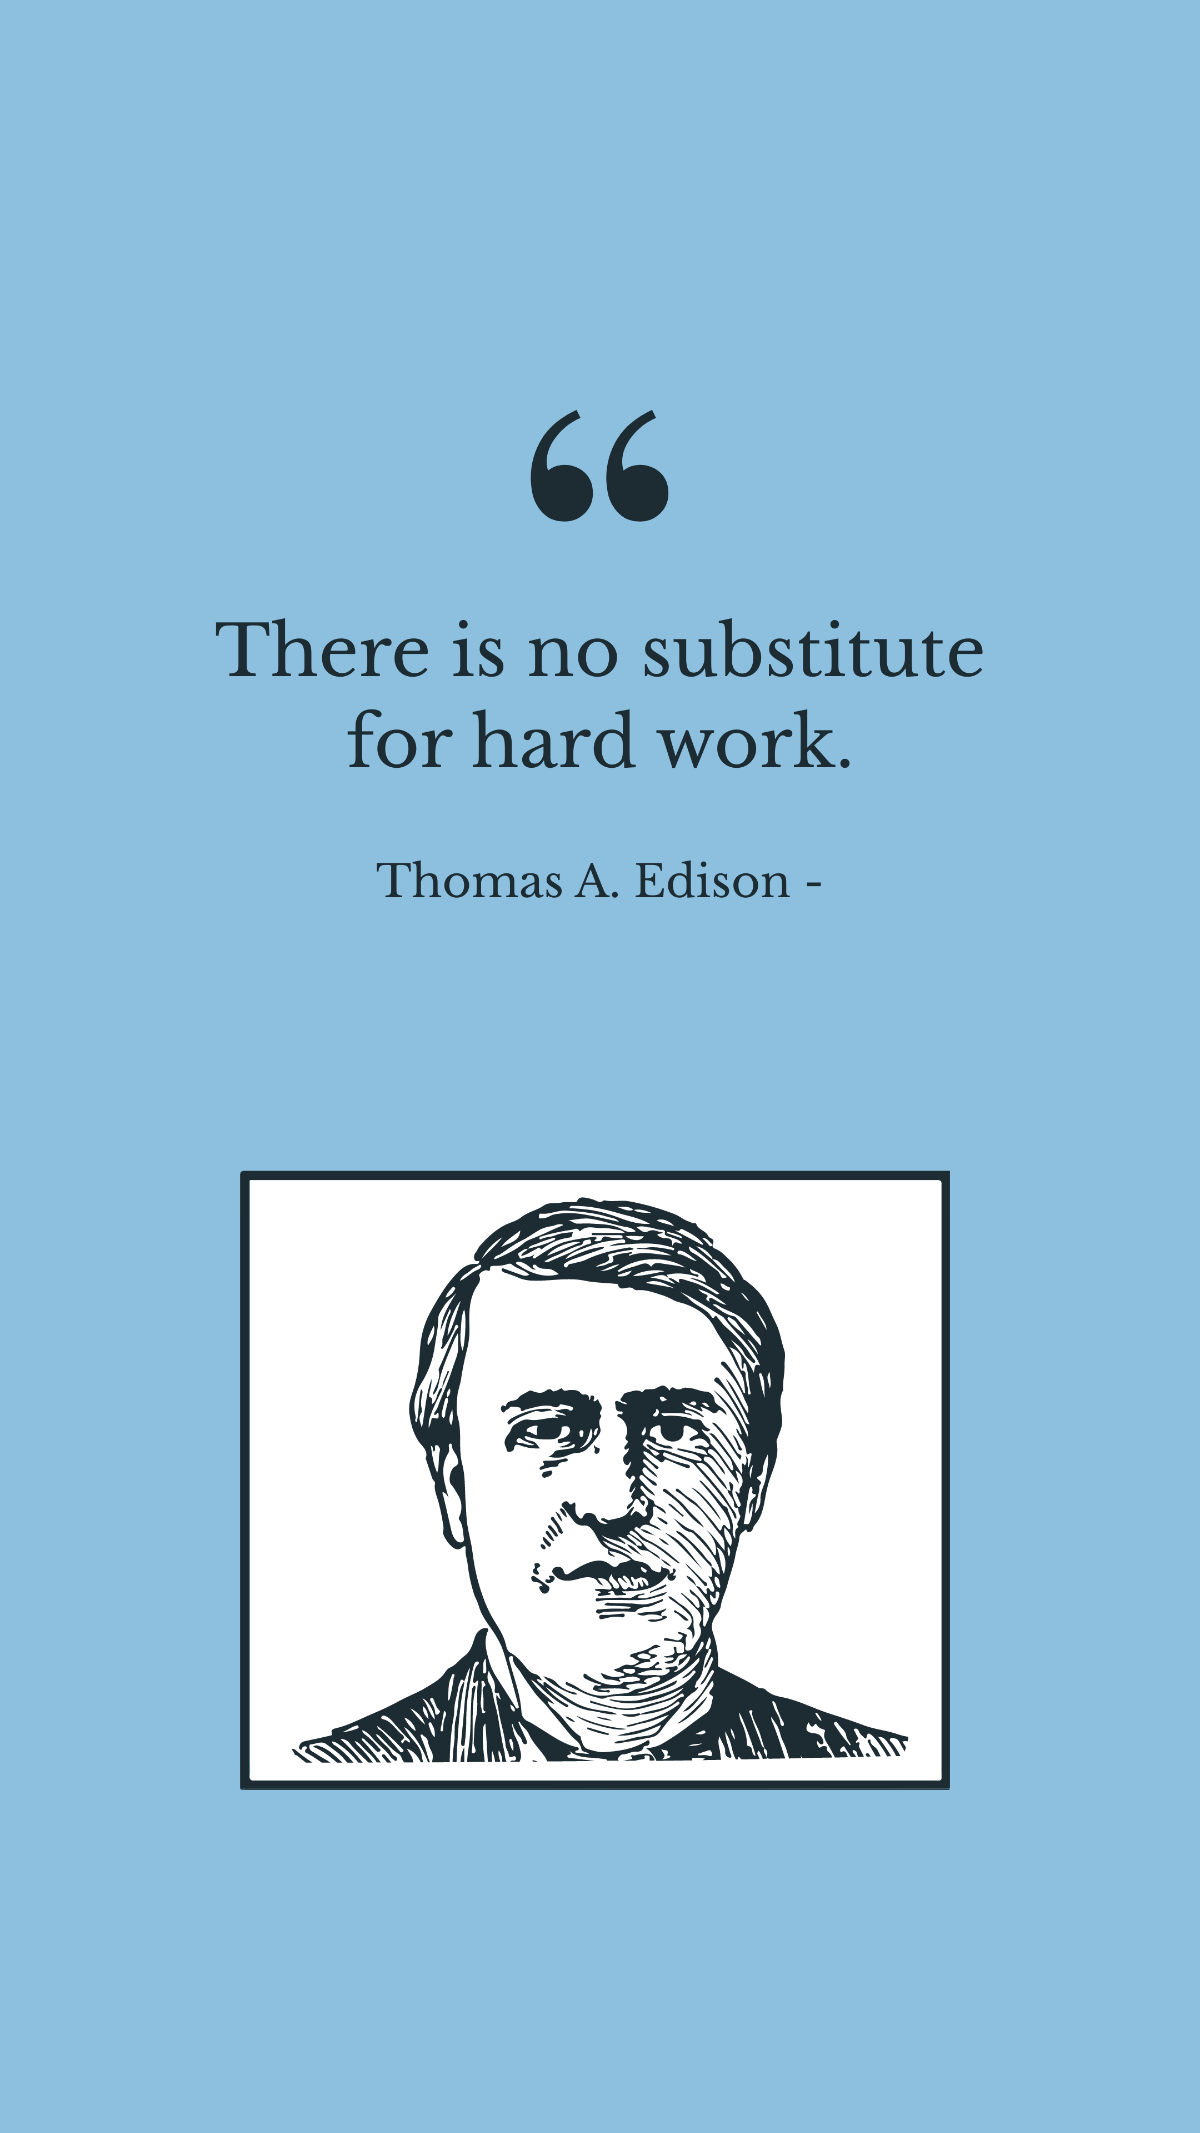 Free Thomas A. Edison - There is no substitute for hard work. Template